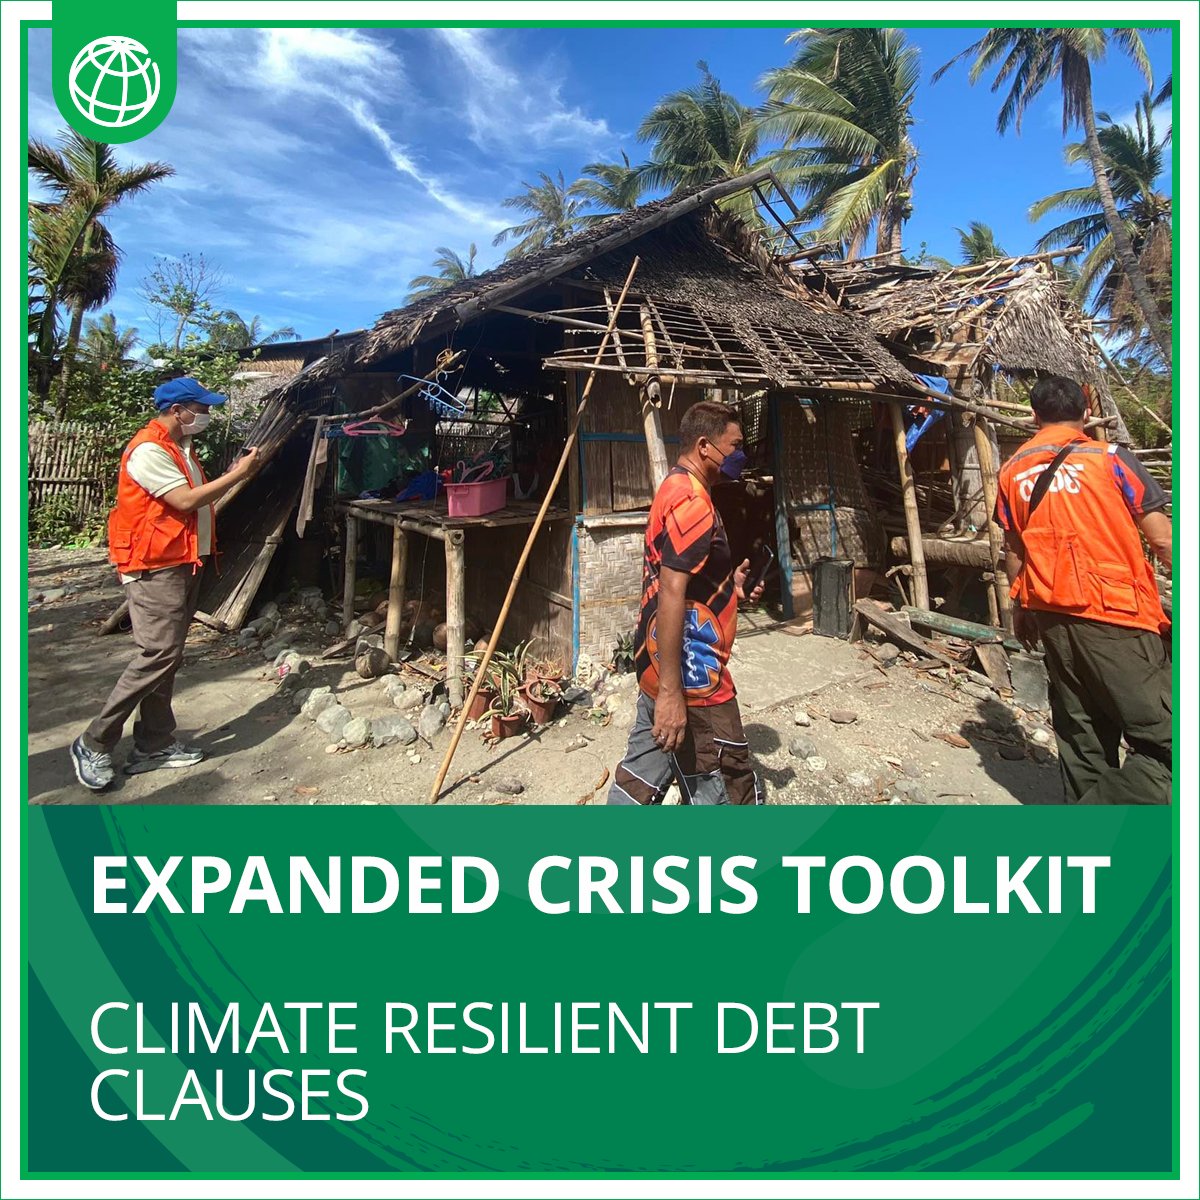 NEWS | The World Bank extends new lifeline to small islands & states struck by disasters, allowing governments to focus on disaster recovery instead of debt repayment when catastrophes occur. wrld.bg/y2rV50Qeqpo #COP28 #LivablePlanet